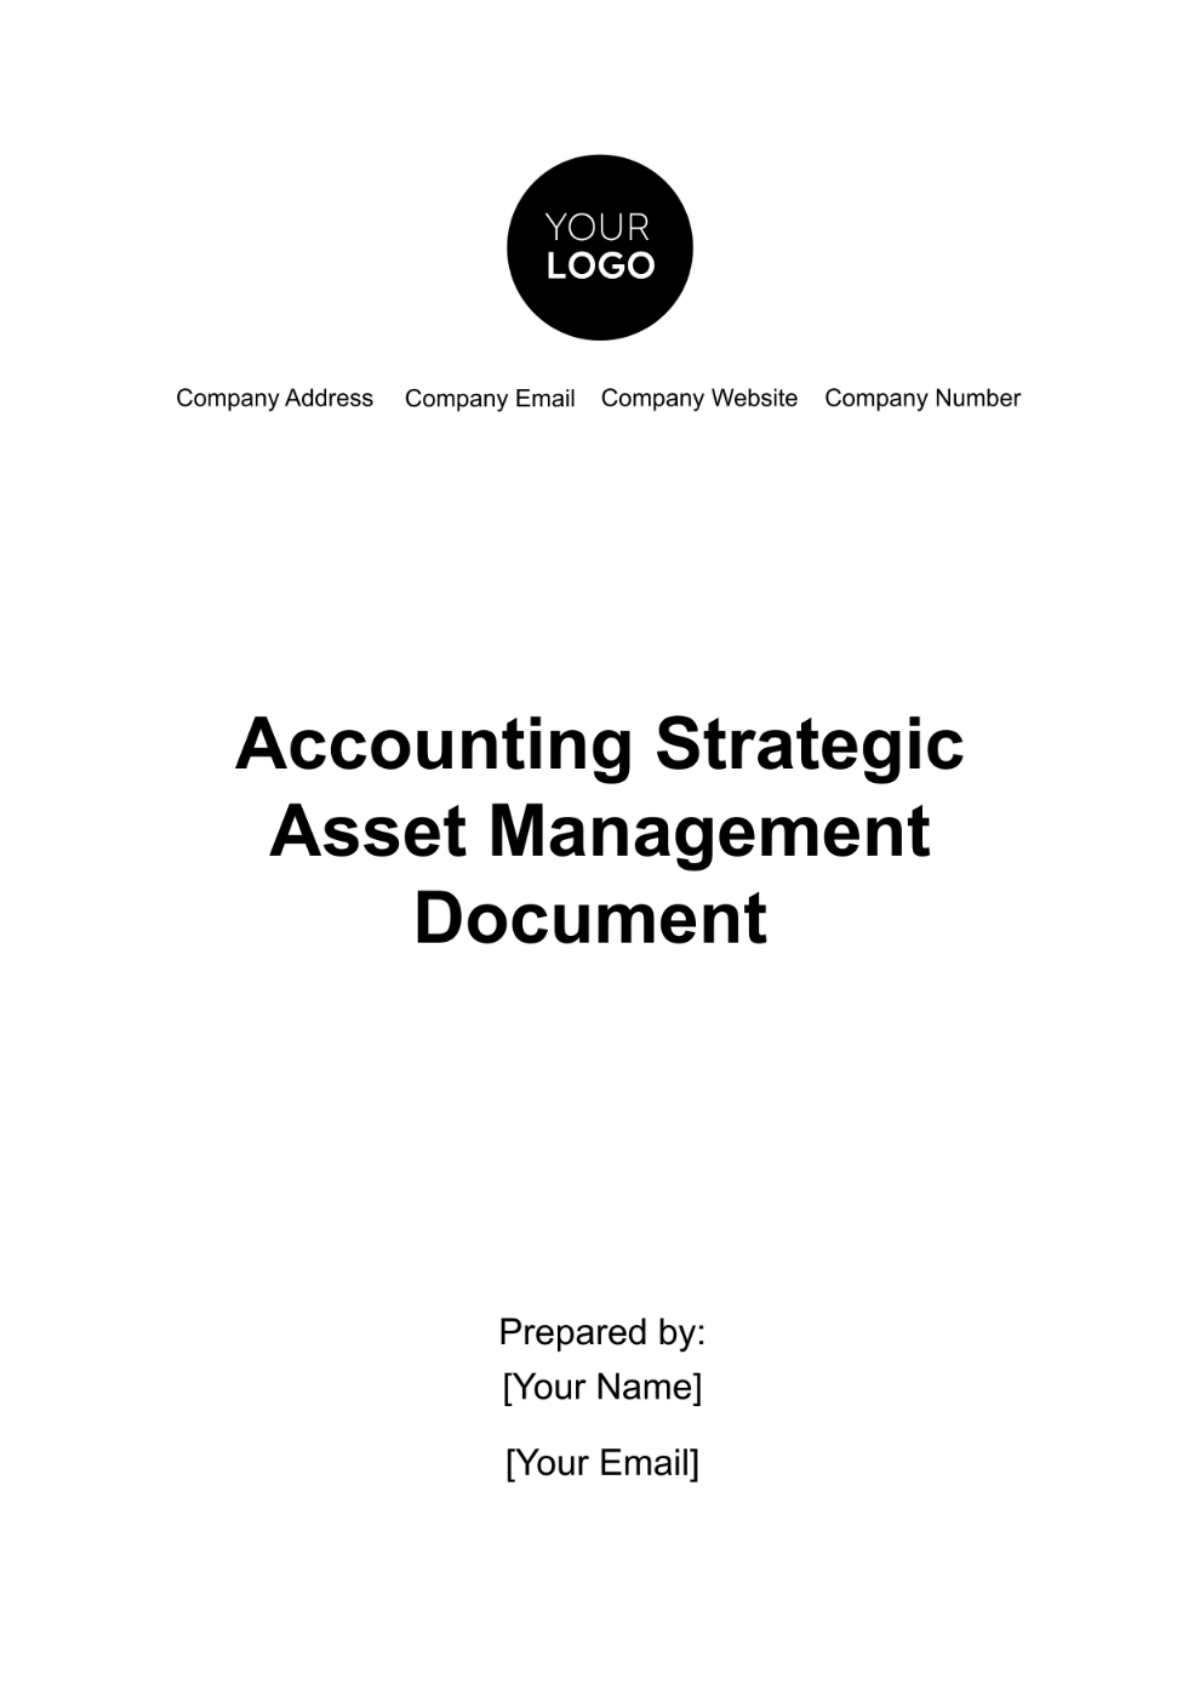 Accounting Strategic Asset Management Document Template